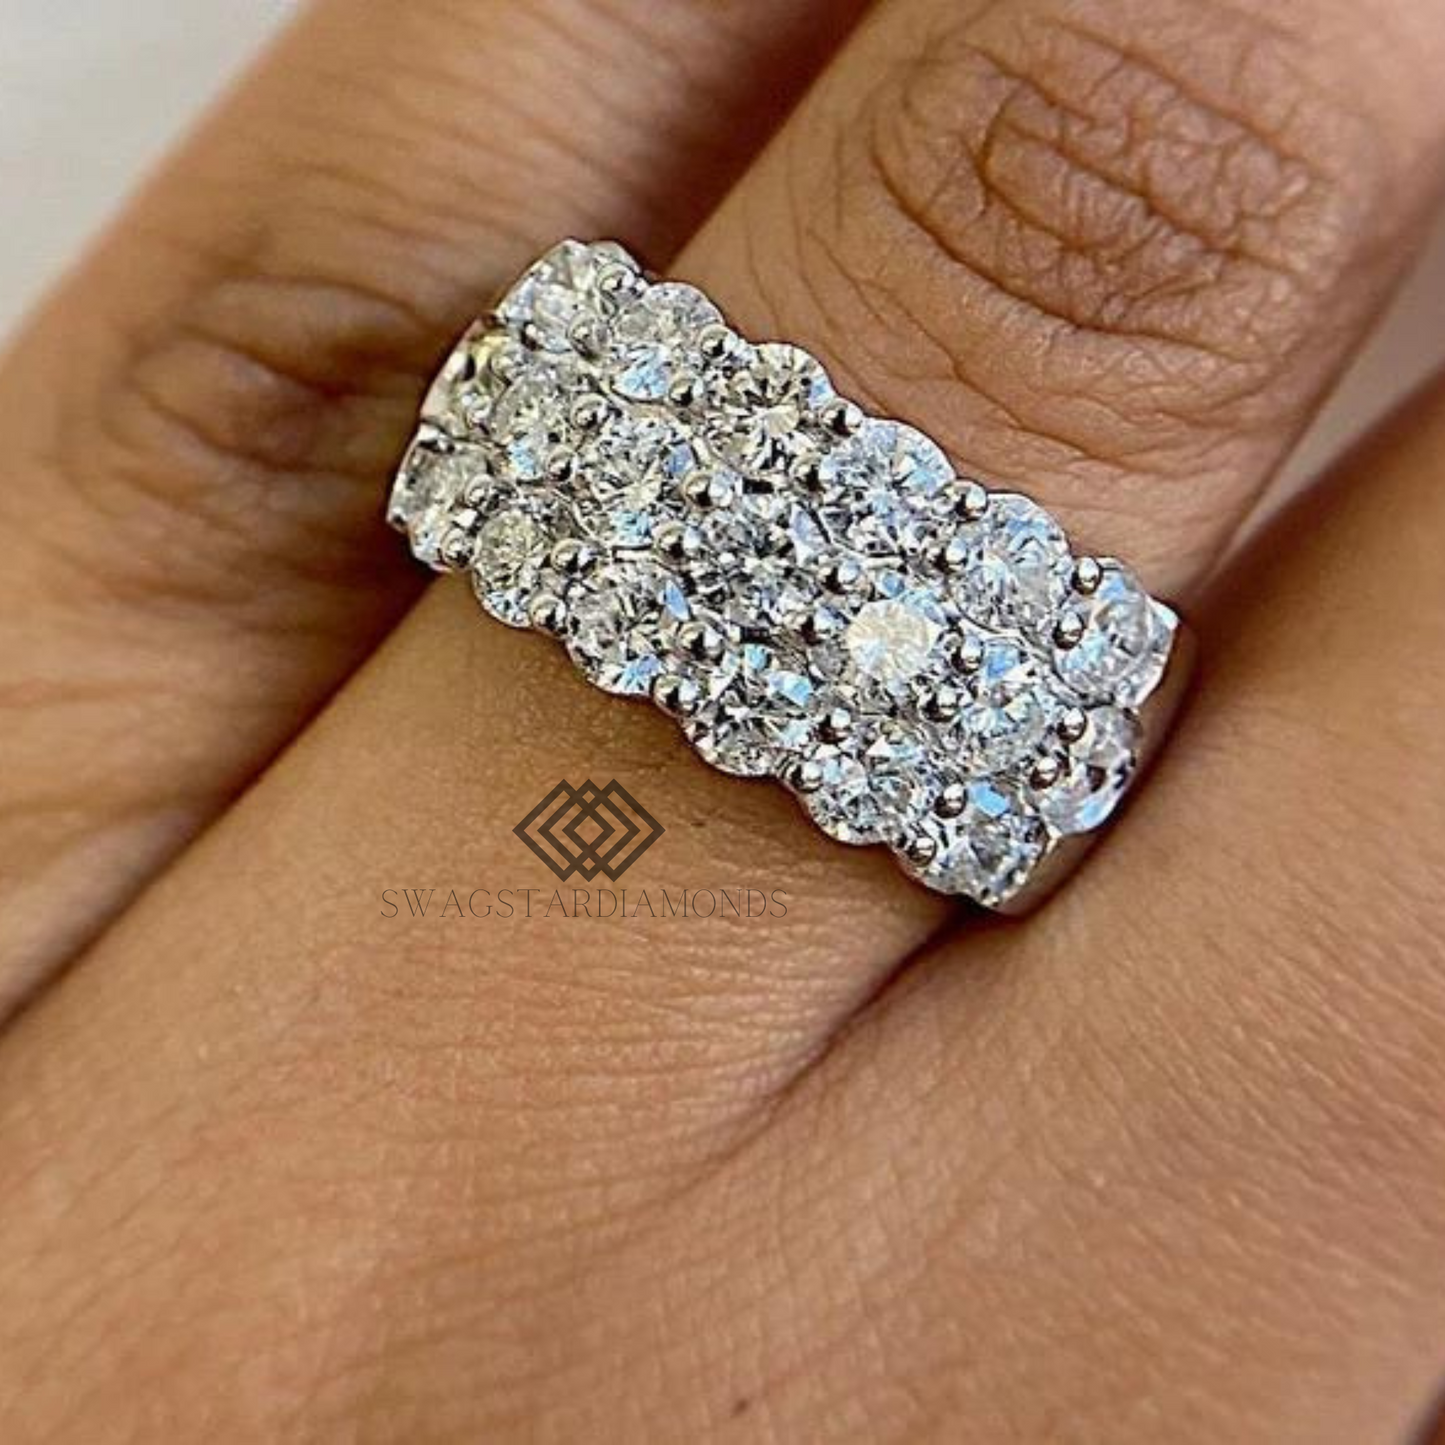 Round Cut Ring With Lab-Grown & Natural Diamonds, Jewelry By Leading Manufacturer From Swagstar, Surat. Explore Wedding, Engagement, Eternity Rings,  Earring & Studs, Bracelets In 10k, 14k, & 18k Gold Varieties, Including White, Yellow, Rose Gold.